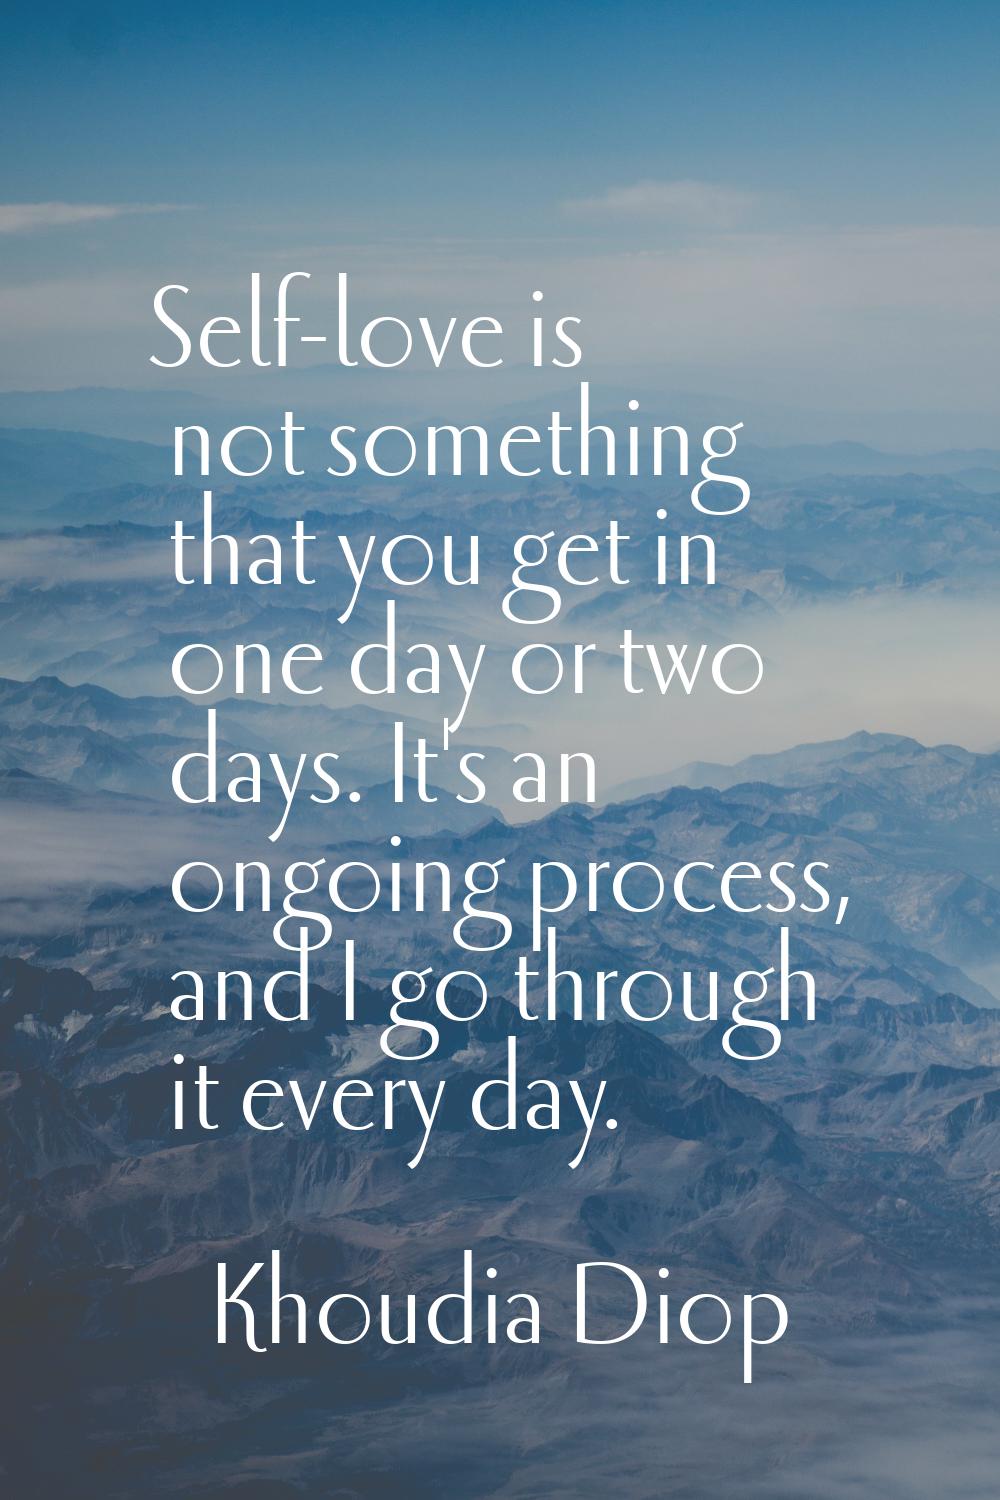 Self-love is not something that you get in one day or two days. It's an ongoing process, and I go t